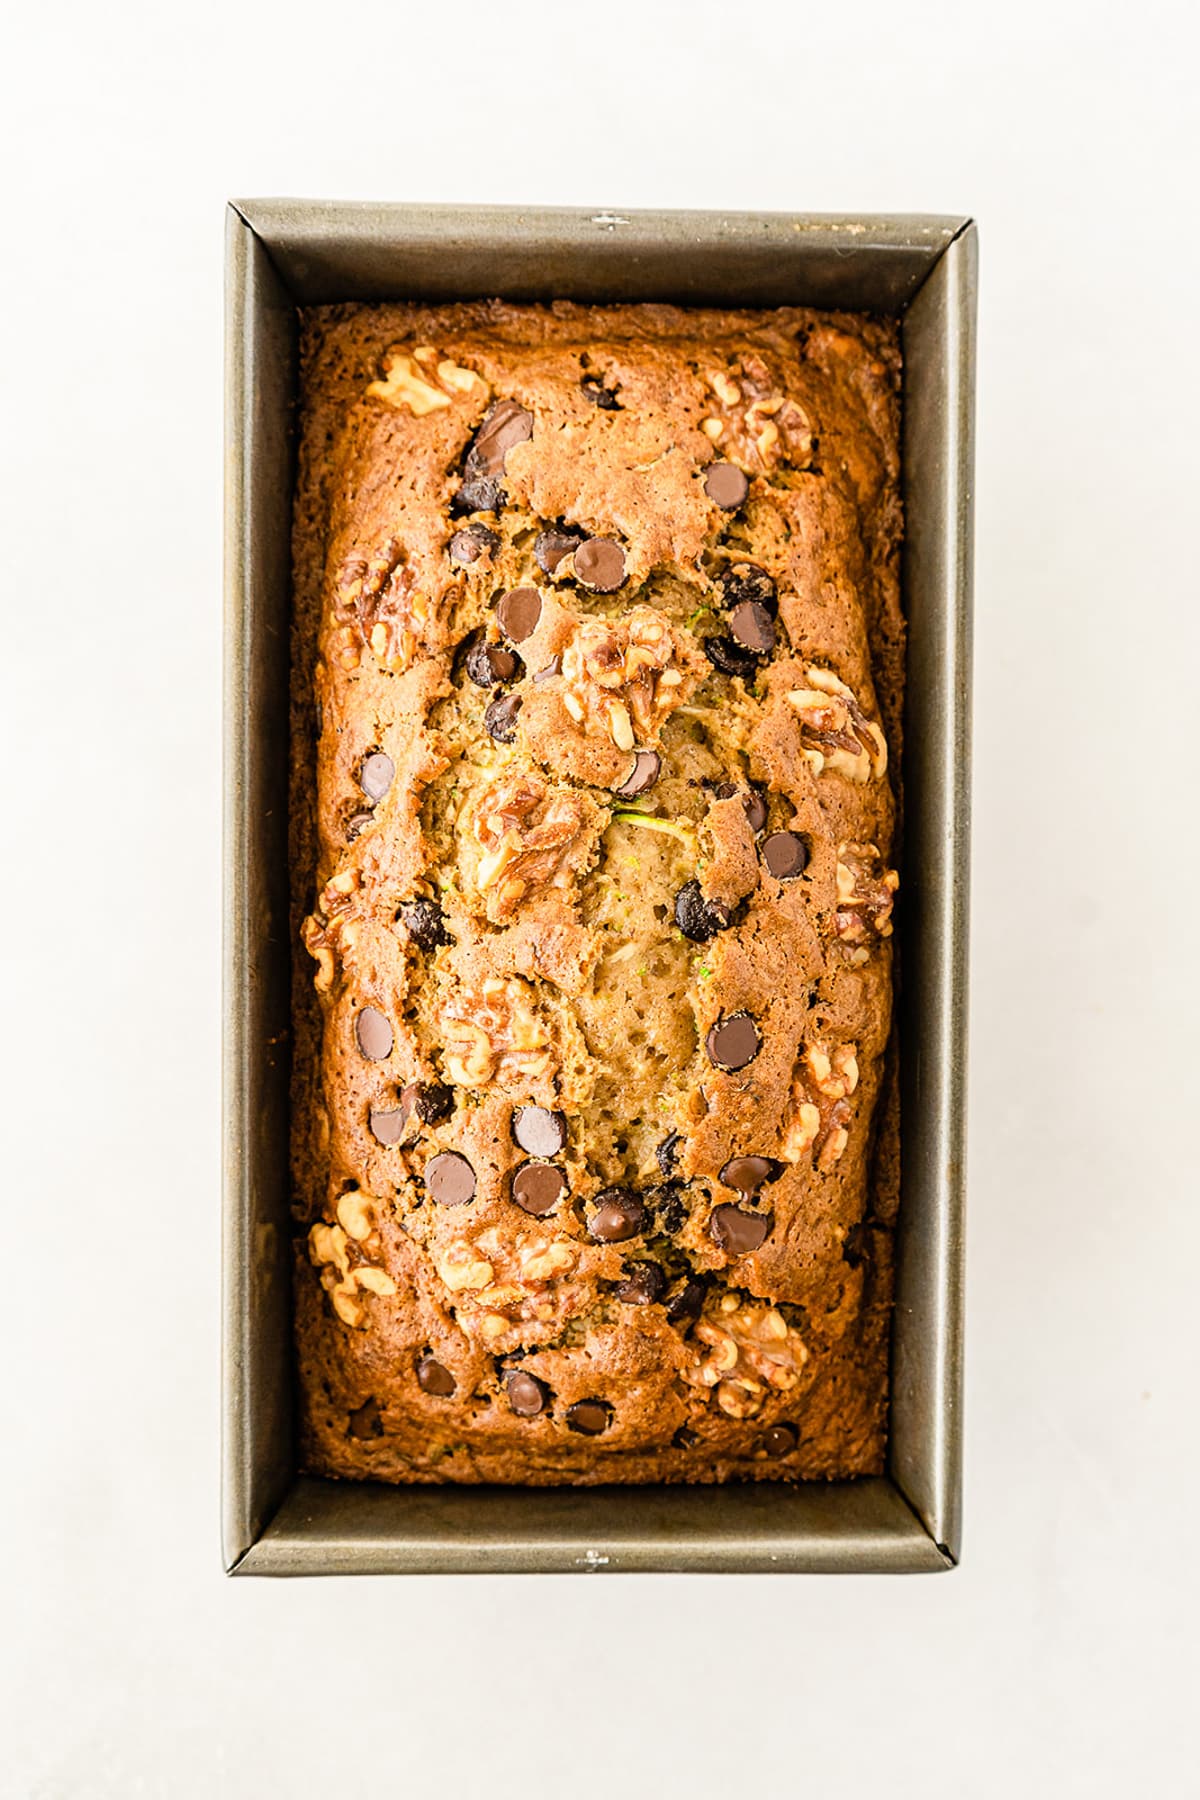 Finished baked chocolate chip walnut zucchini bread load in pan from above on a counter.